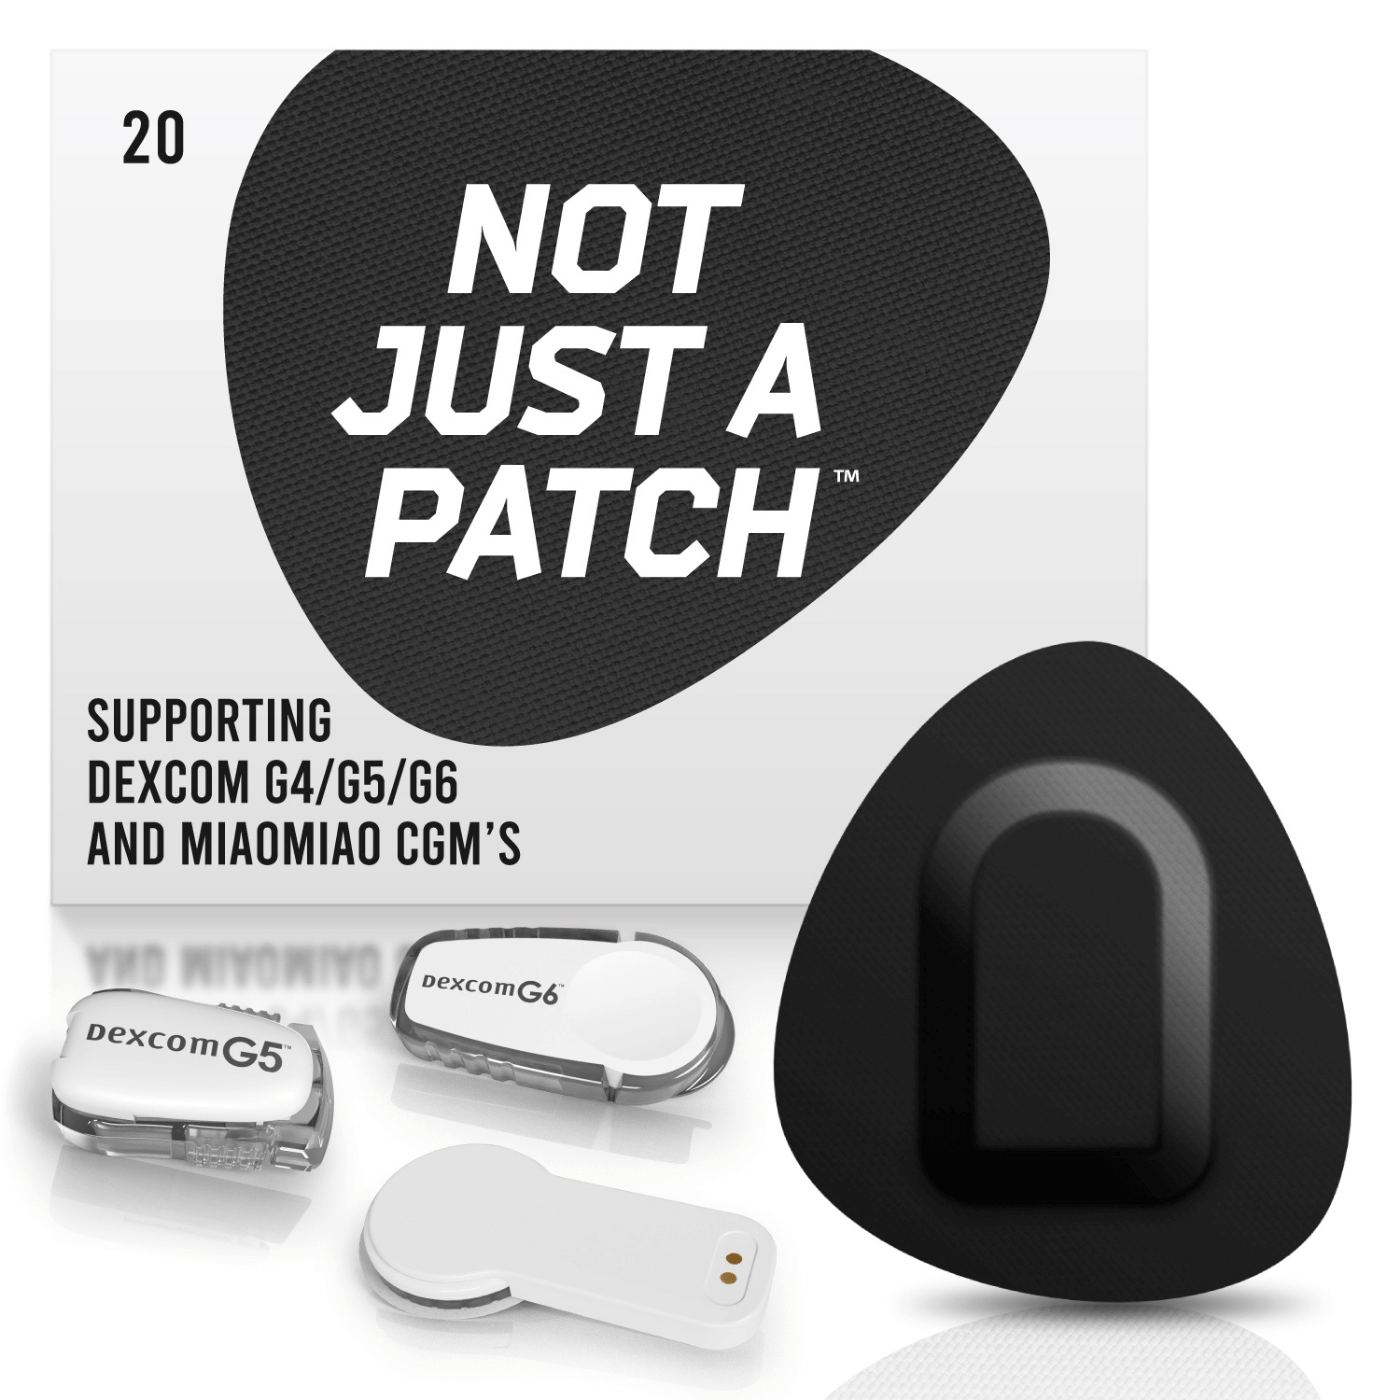 Shop Mystery Patch today - Protect your CGM - Trusted by thousands